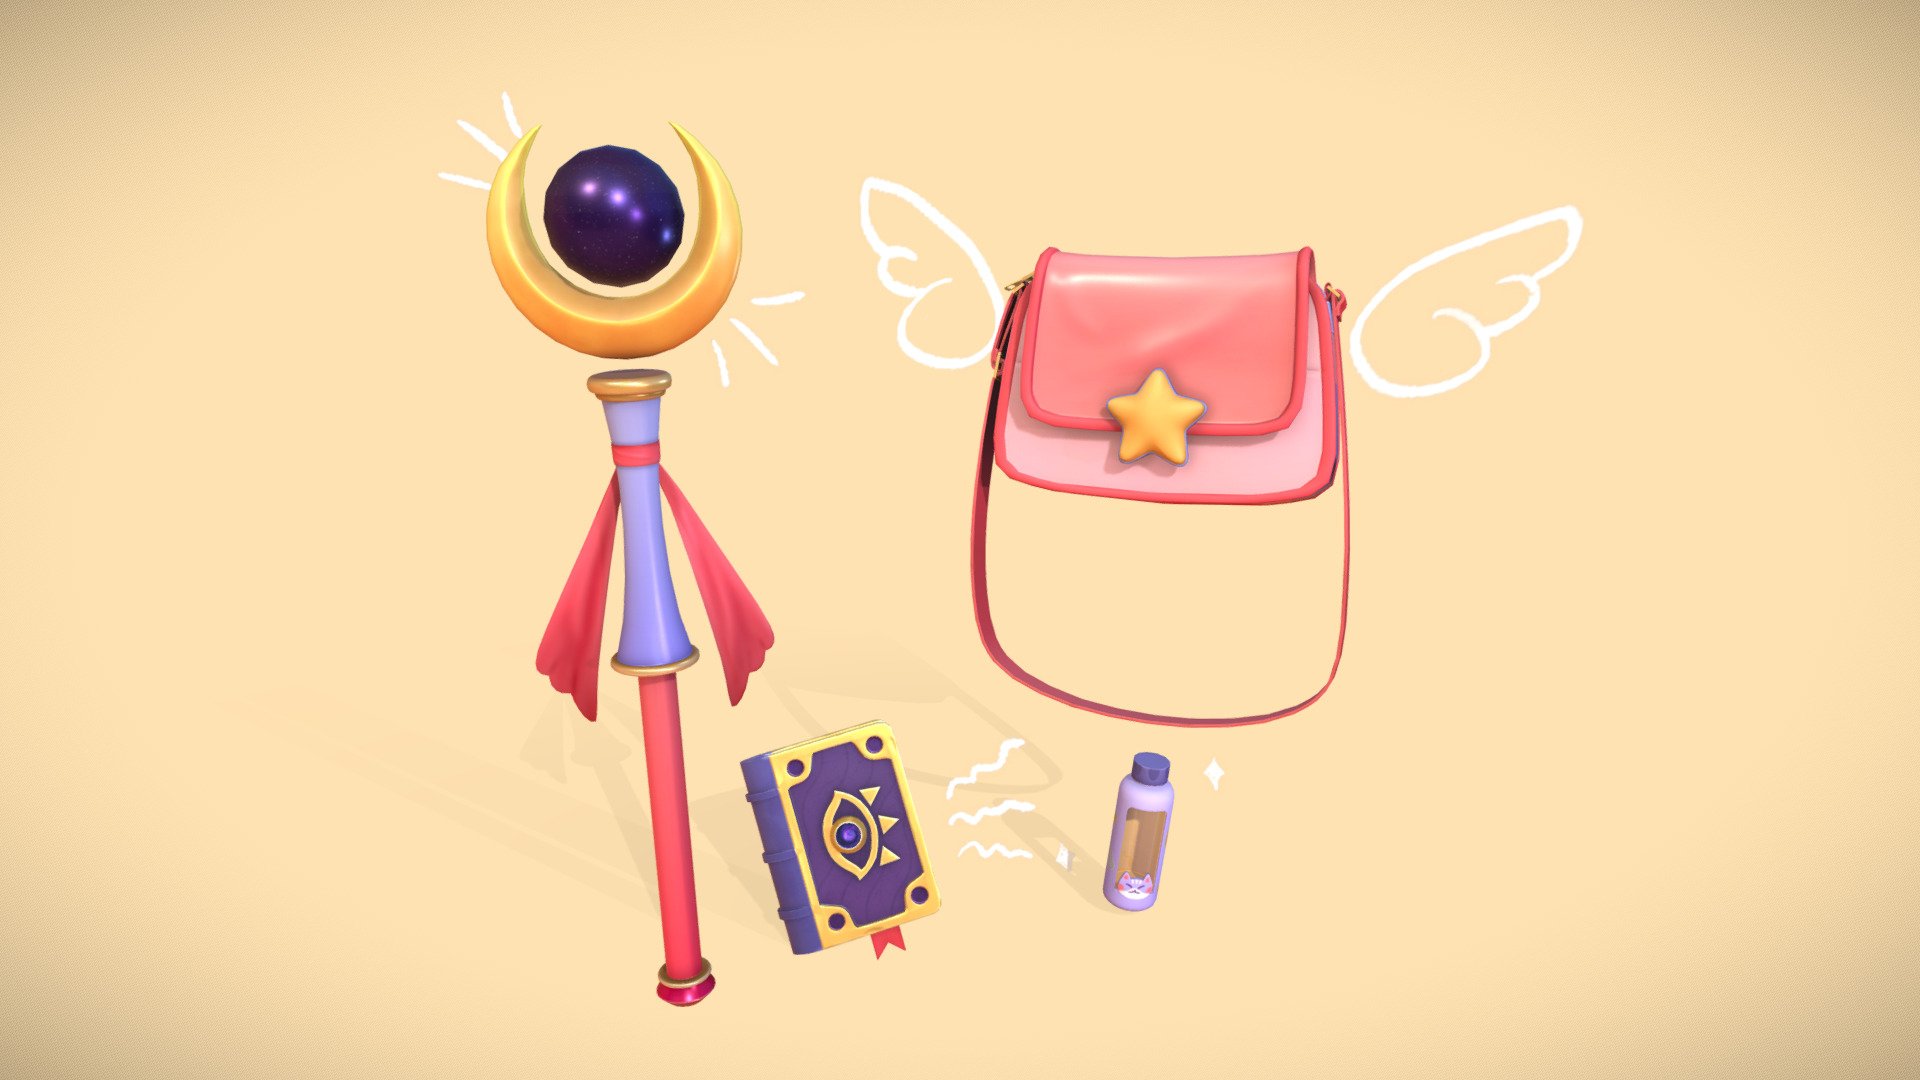 Being a full-time magical girl can be a hard job when you don't have the right tools! With our exclusive Mahou Shoujo Package you can get everything that you need to save our world:

🌙A Magical Staff, essential for channeling your powers and striking a pose.

👜A Magical Messenger bag, to carry anything you can think of.

📘A Mysterious Book Spells, just in case you need a little refresher.

🥤A Non-Magical Water Bottle, for your potions, energy drinks or just&hellip; Water.





This is my entry for the #AdventureKitChallenge!

I've wanted to model some magical girl related prop for some time and this was the perfect chance to do it. I was planning to put together a little scene with more props, but I sadly ran out of time 🙃. There are lots of details I'd like to improve and add, so I'll probably revisit this in the future. Still, I'm quite happy with the colours! - A Magical Girl's Adventure Kit - 3D model by Marta (@ctrlmarta) 3d model